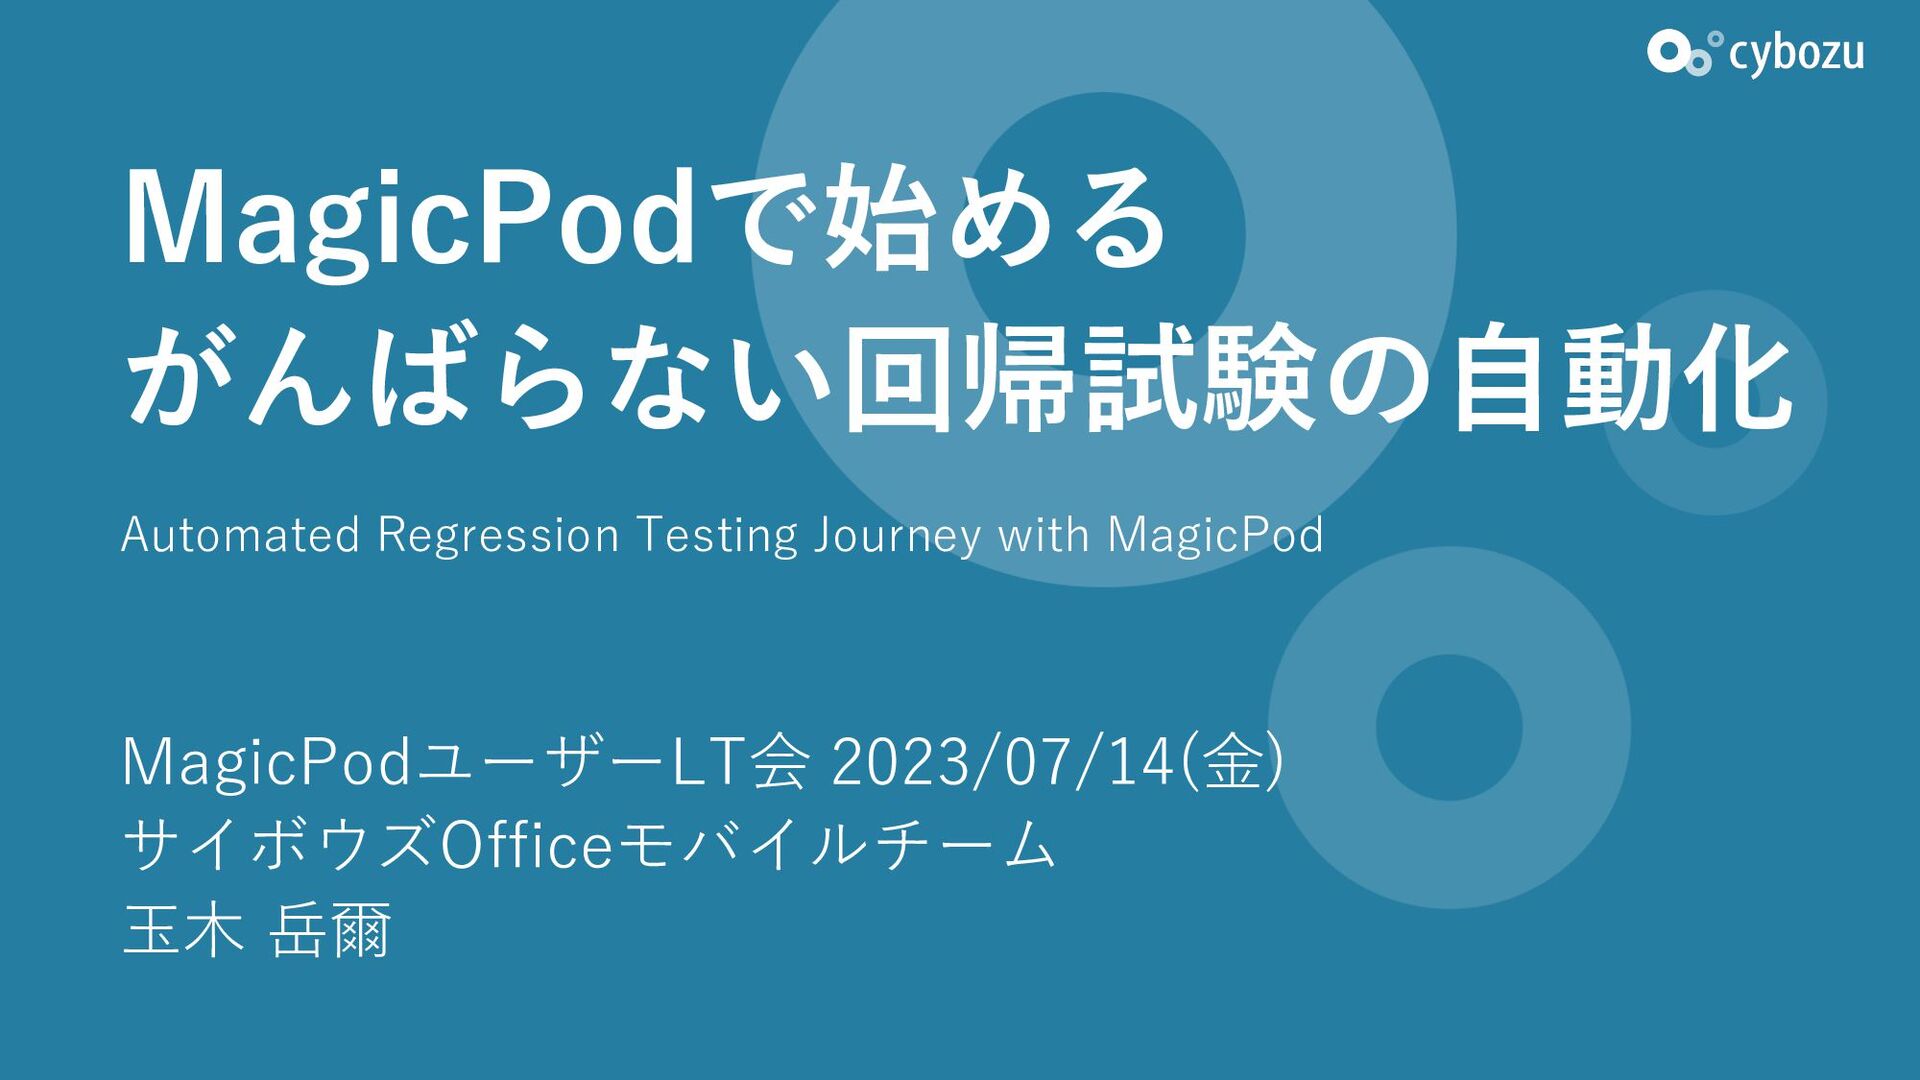 Slide Top: MagicPodで始めるがんばらない回帰試験の自動化​/Automated Regression Testing Journey with MagicPod​